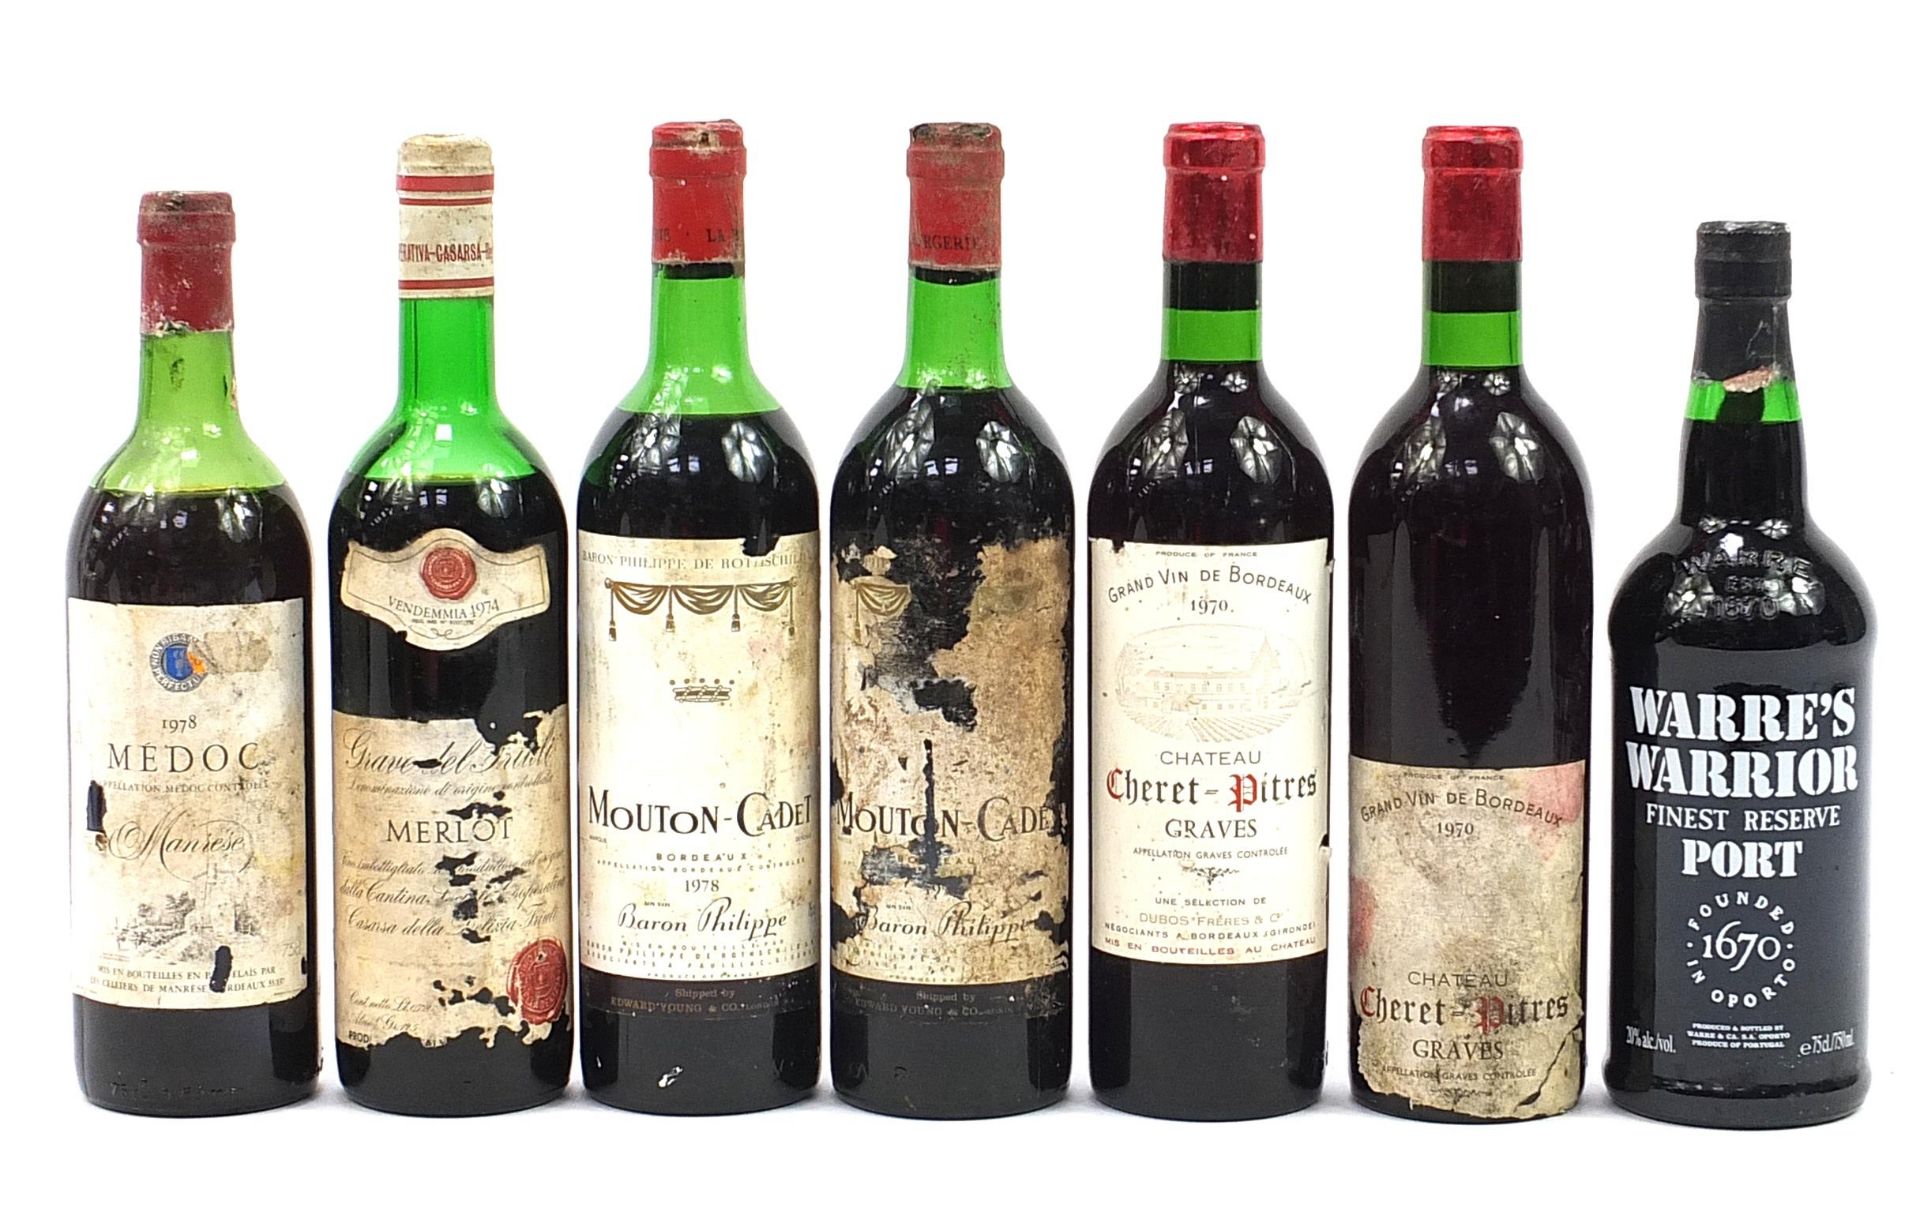 Seven bottles of wine and port including Chateau Cheret-Pitres, Merlot and Medoc